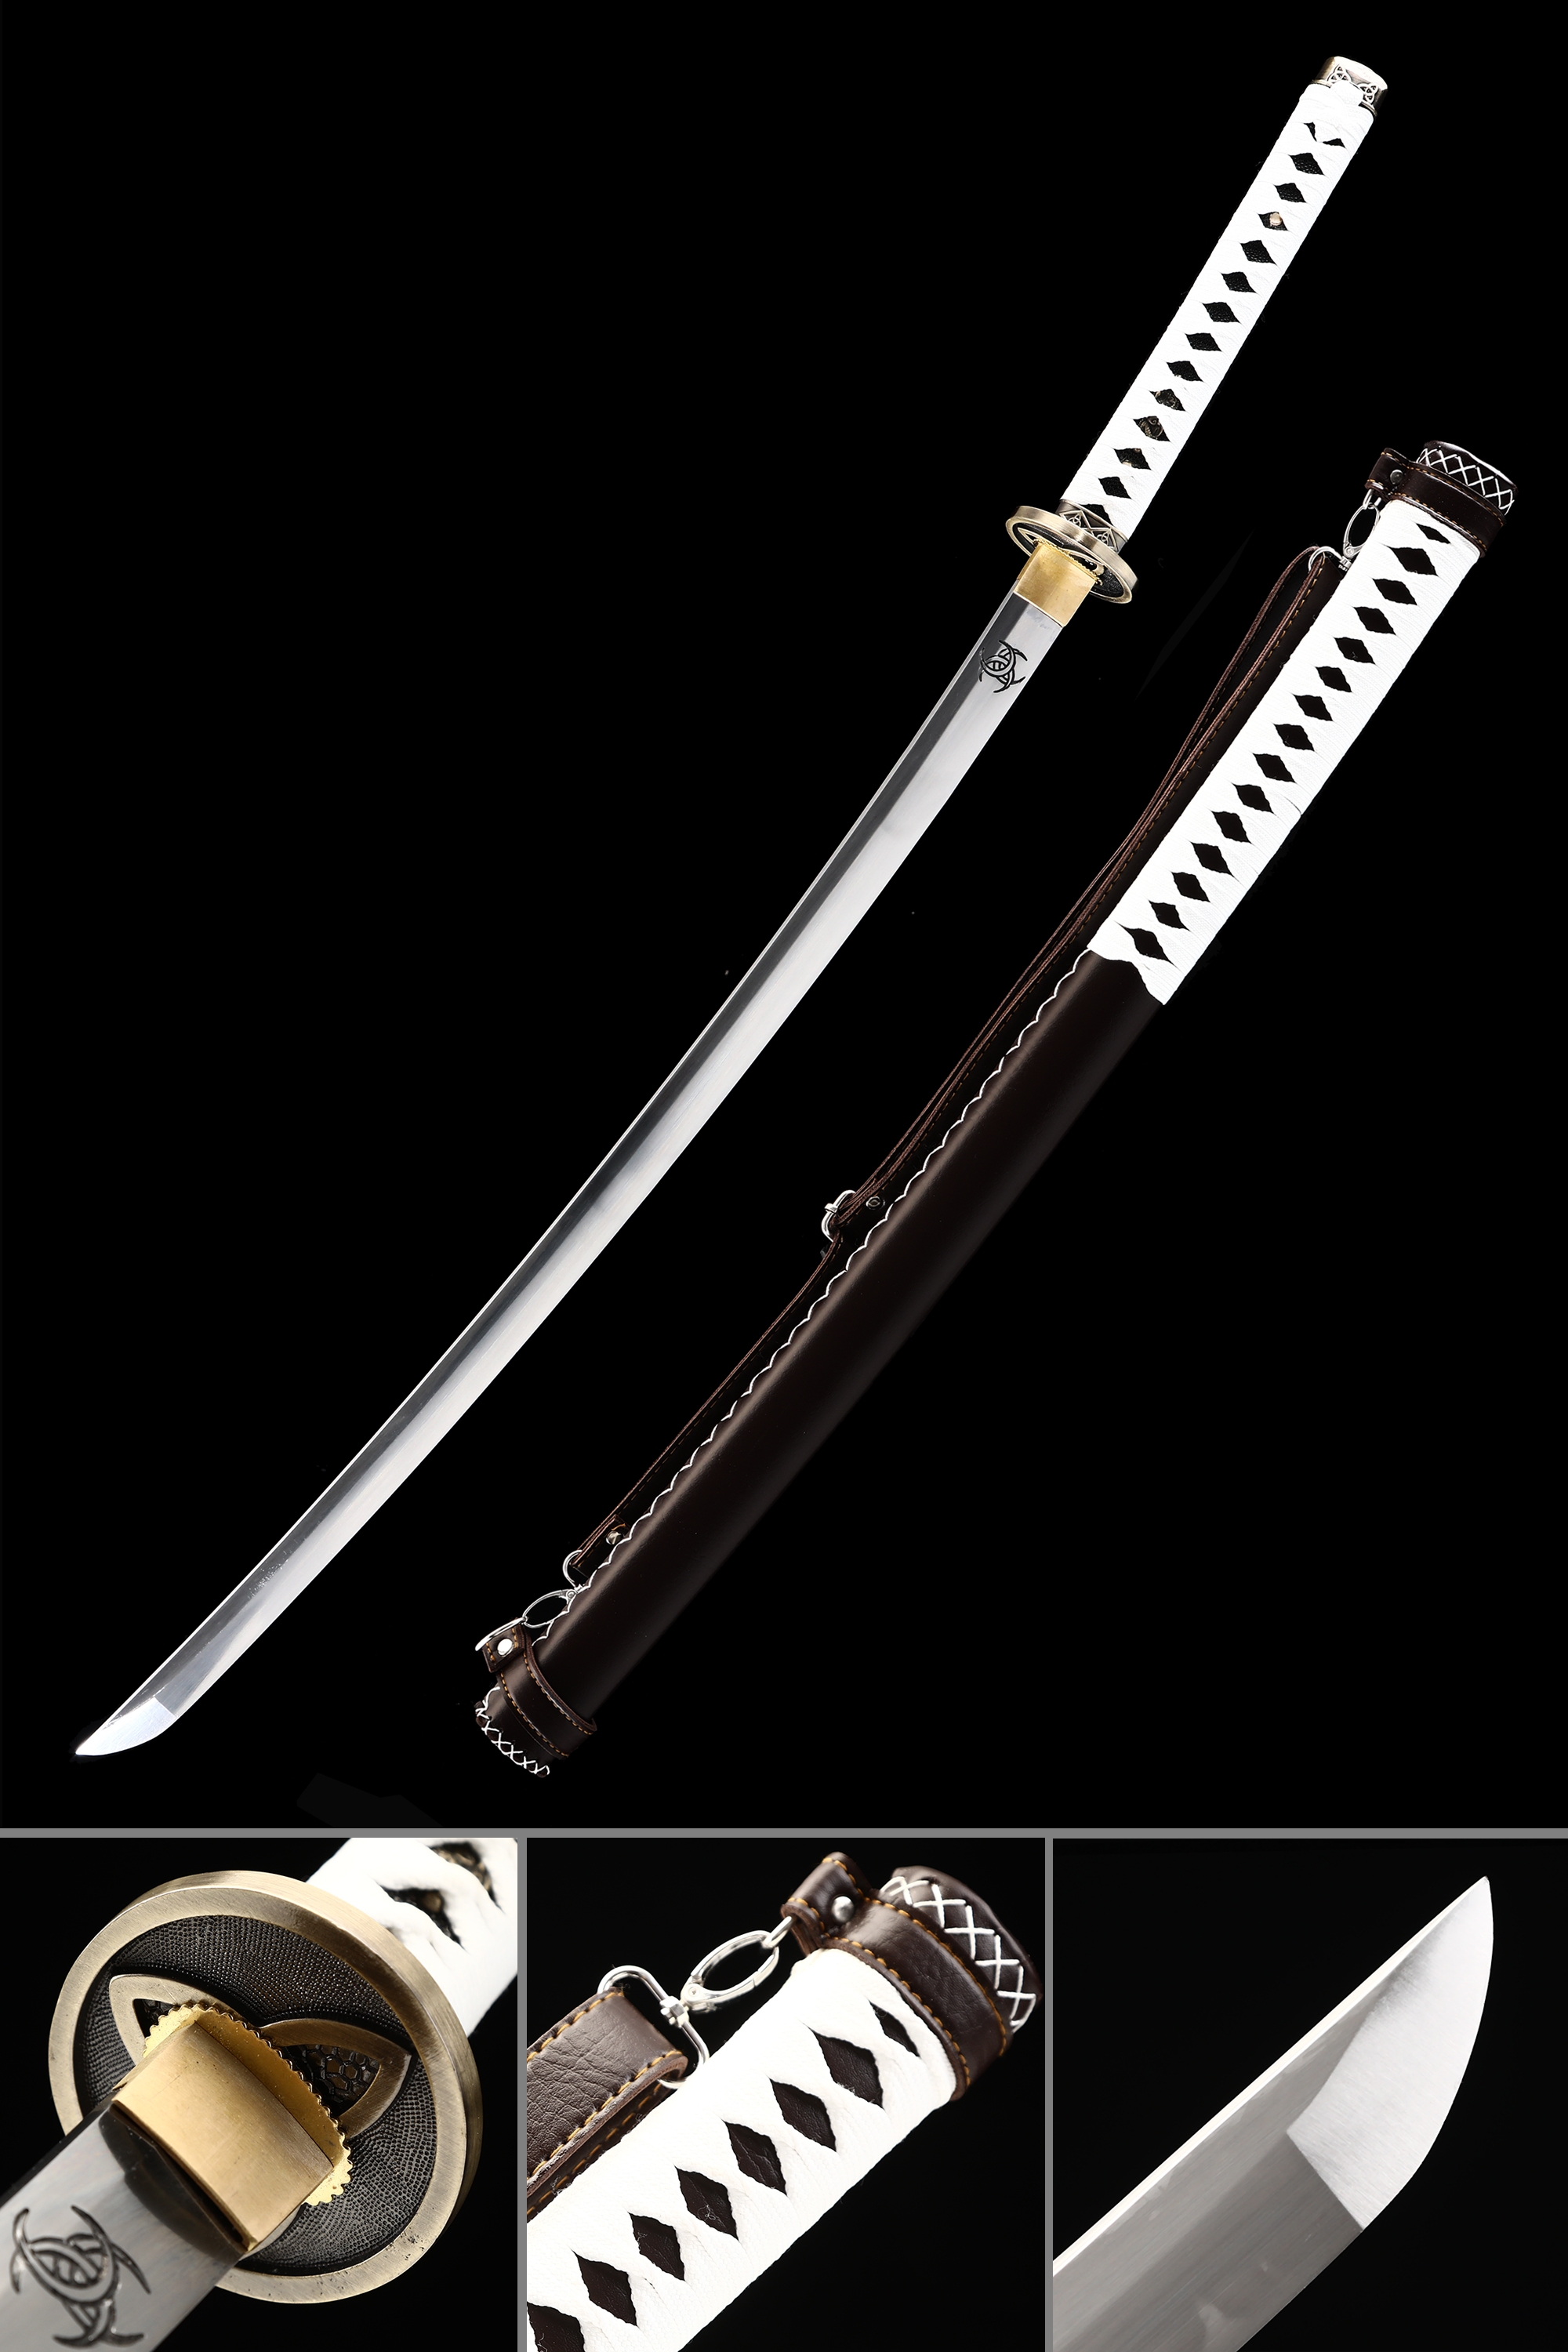 Details about   The Walking Dead Samurai Sword-Michonne's Katana Zombie Killer Hand Forged Full 